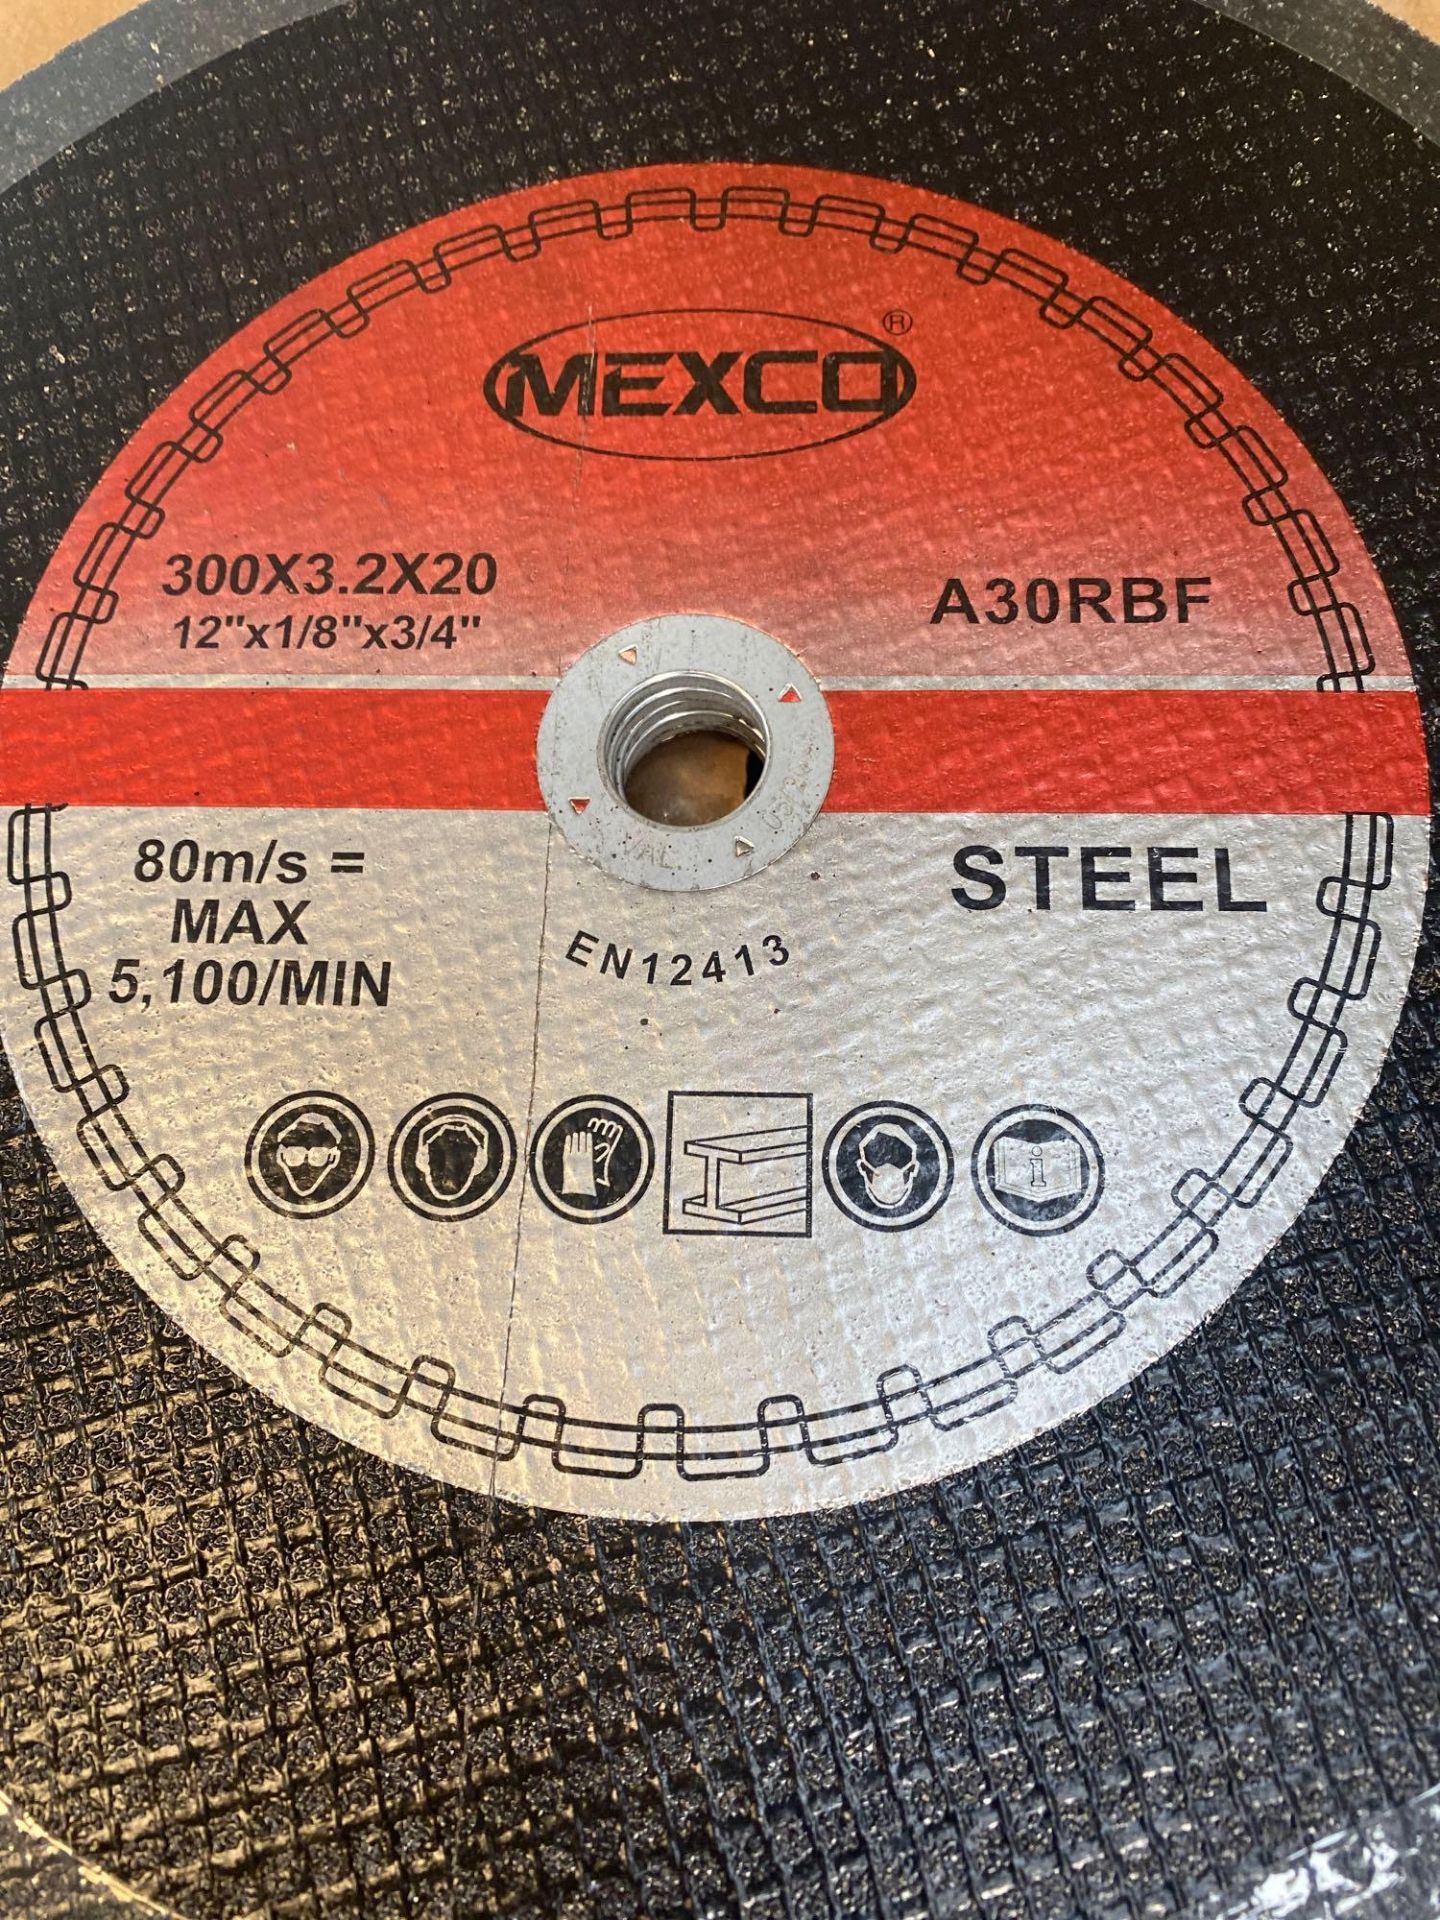 100 Mexico A30 RBF steel cutting discs, 300x3.2x20 - Image 2 of 2